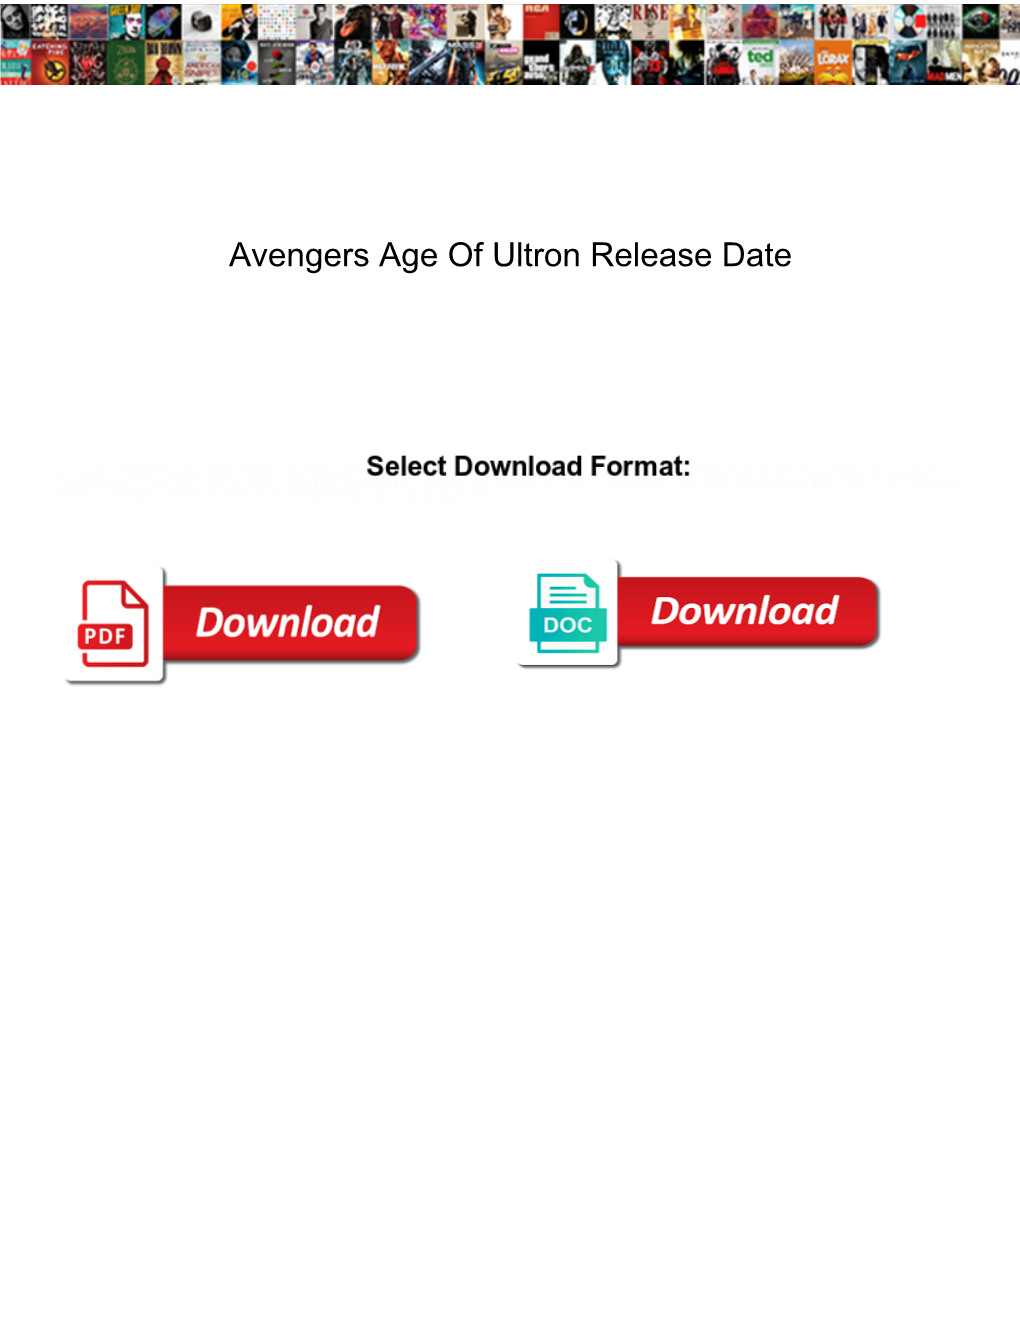 Avengers Age of Ultron Release Date